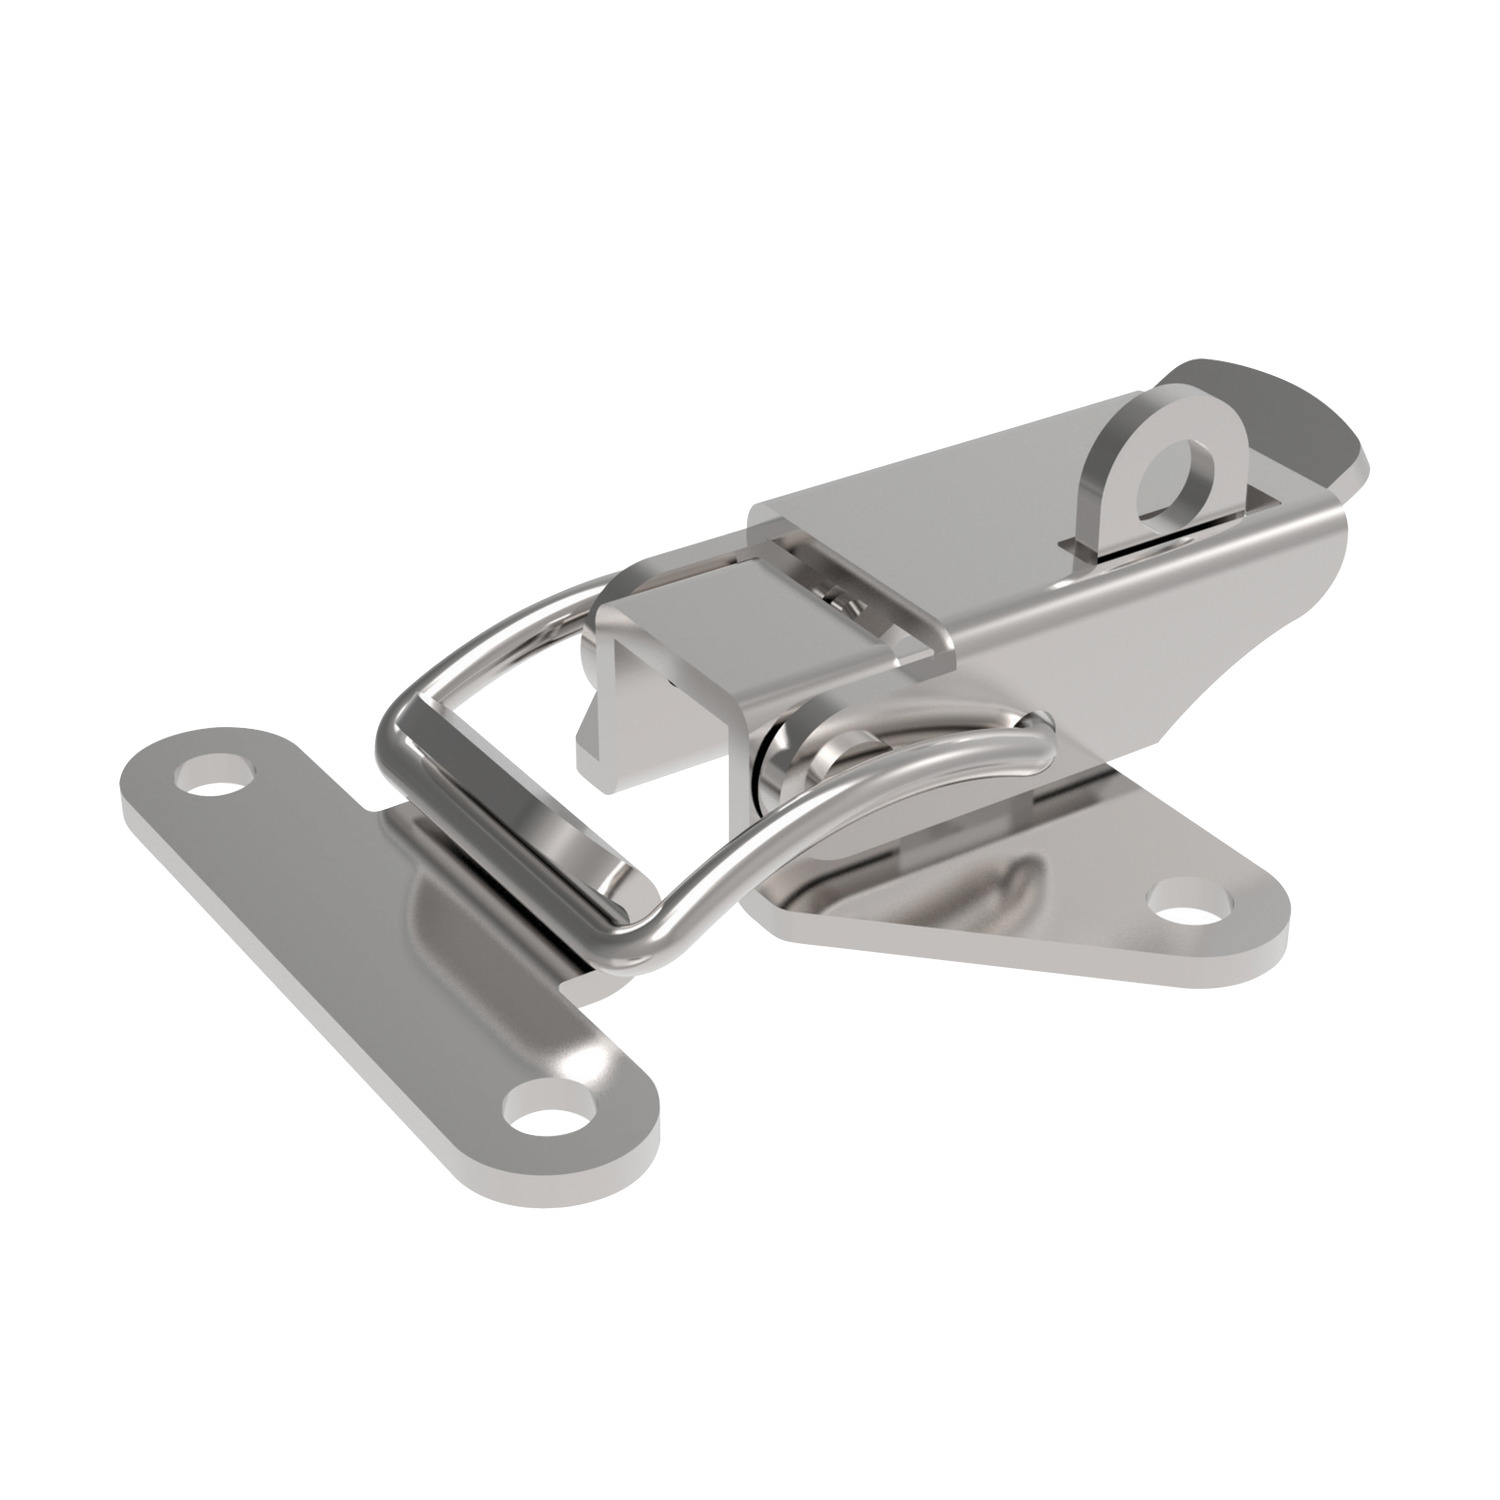 J0500.AC0004 Toggle Latches - Steel. Zinc Plated Steel - 52 - 11 - 33